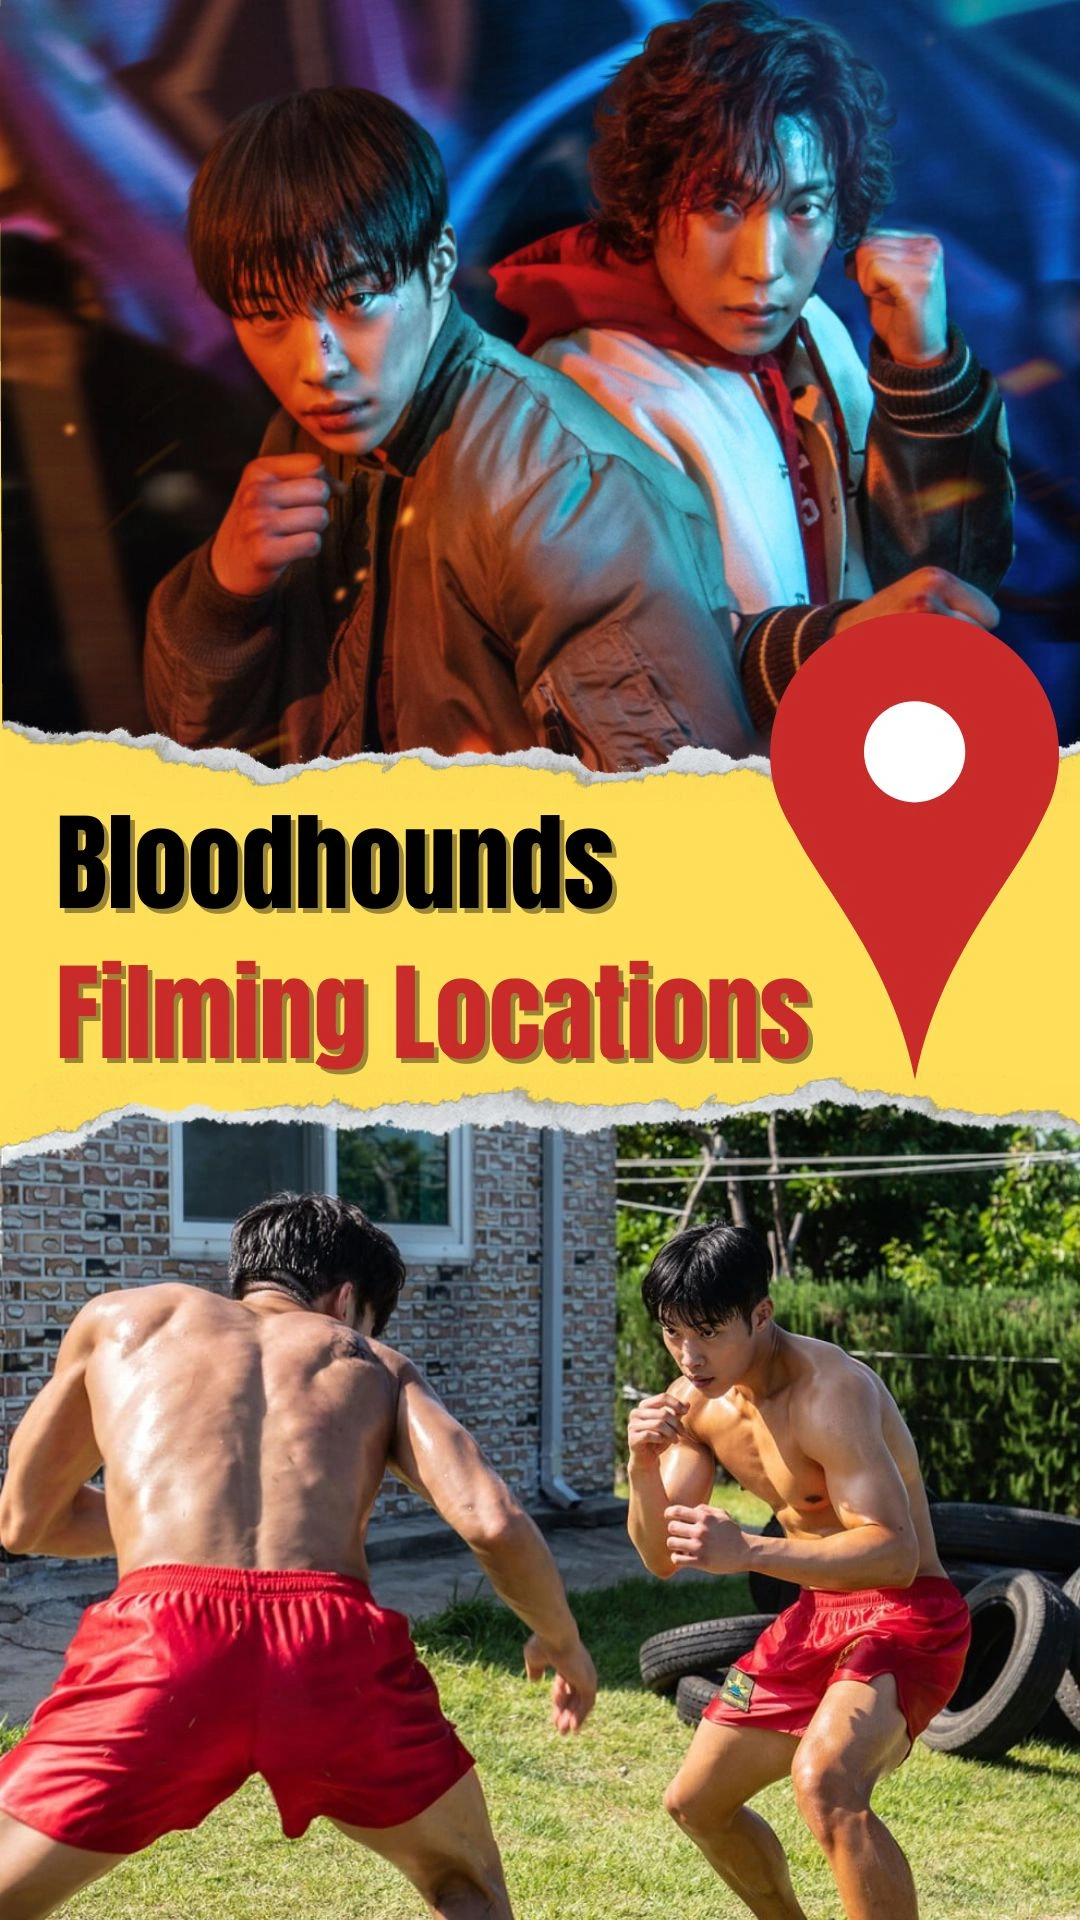 Bloodhounds Filming Locations